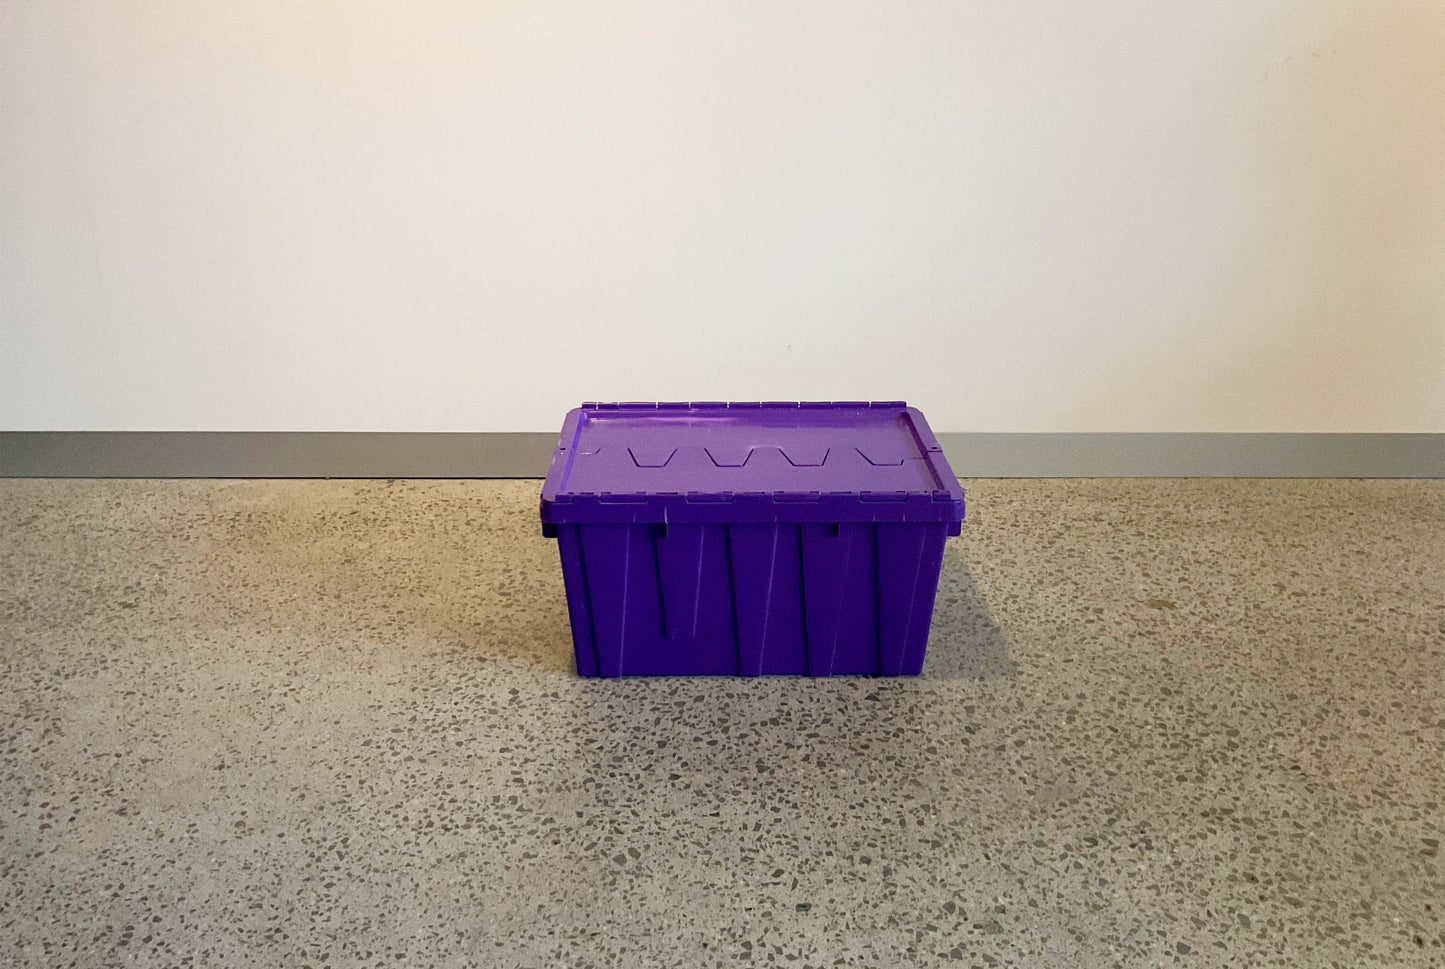 The small eco packing tub shown from side on, is plain purple with no logo.